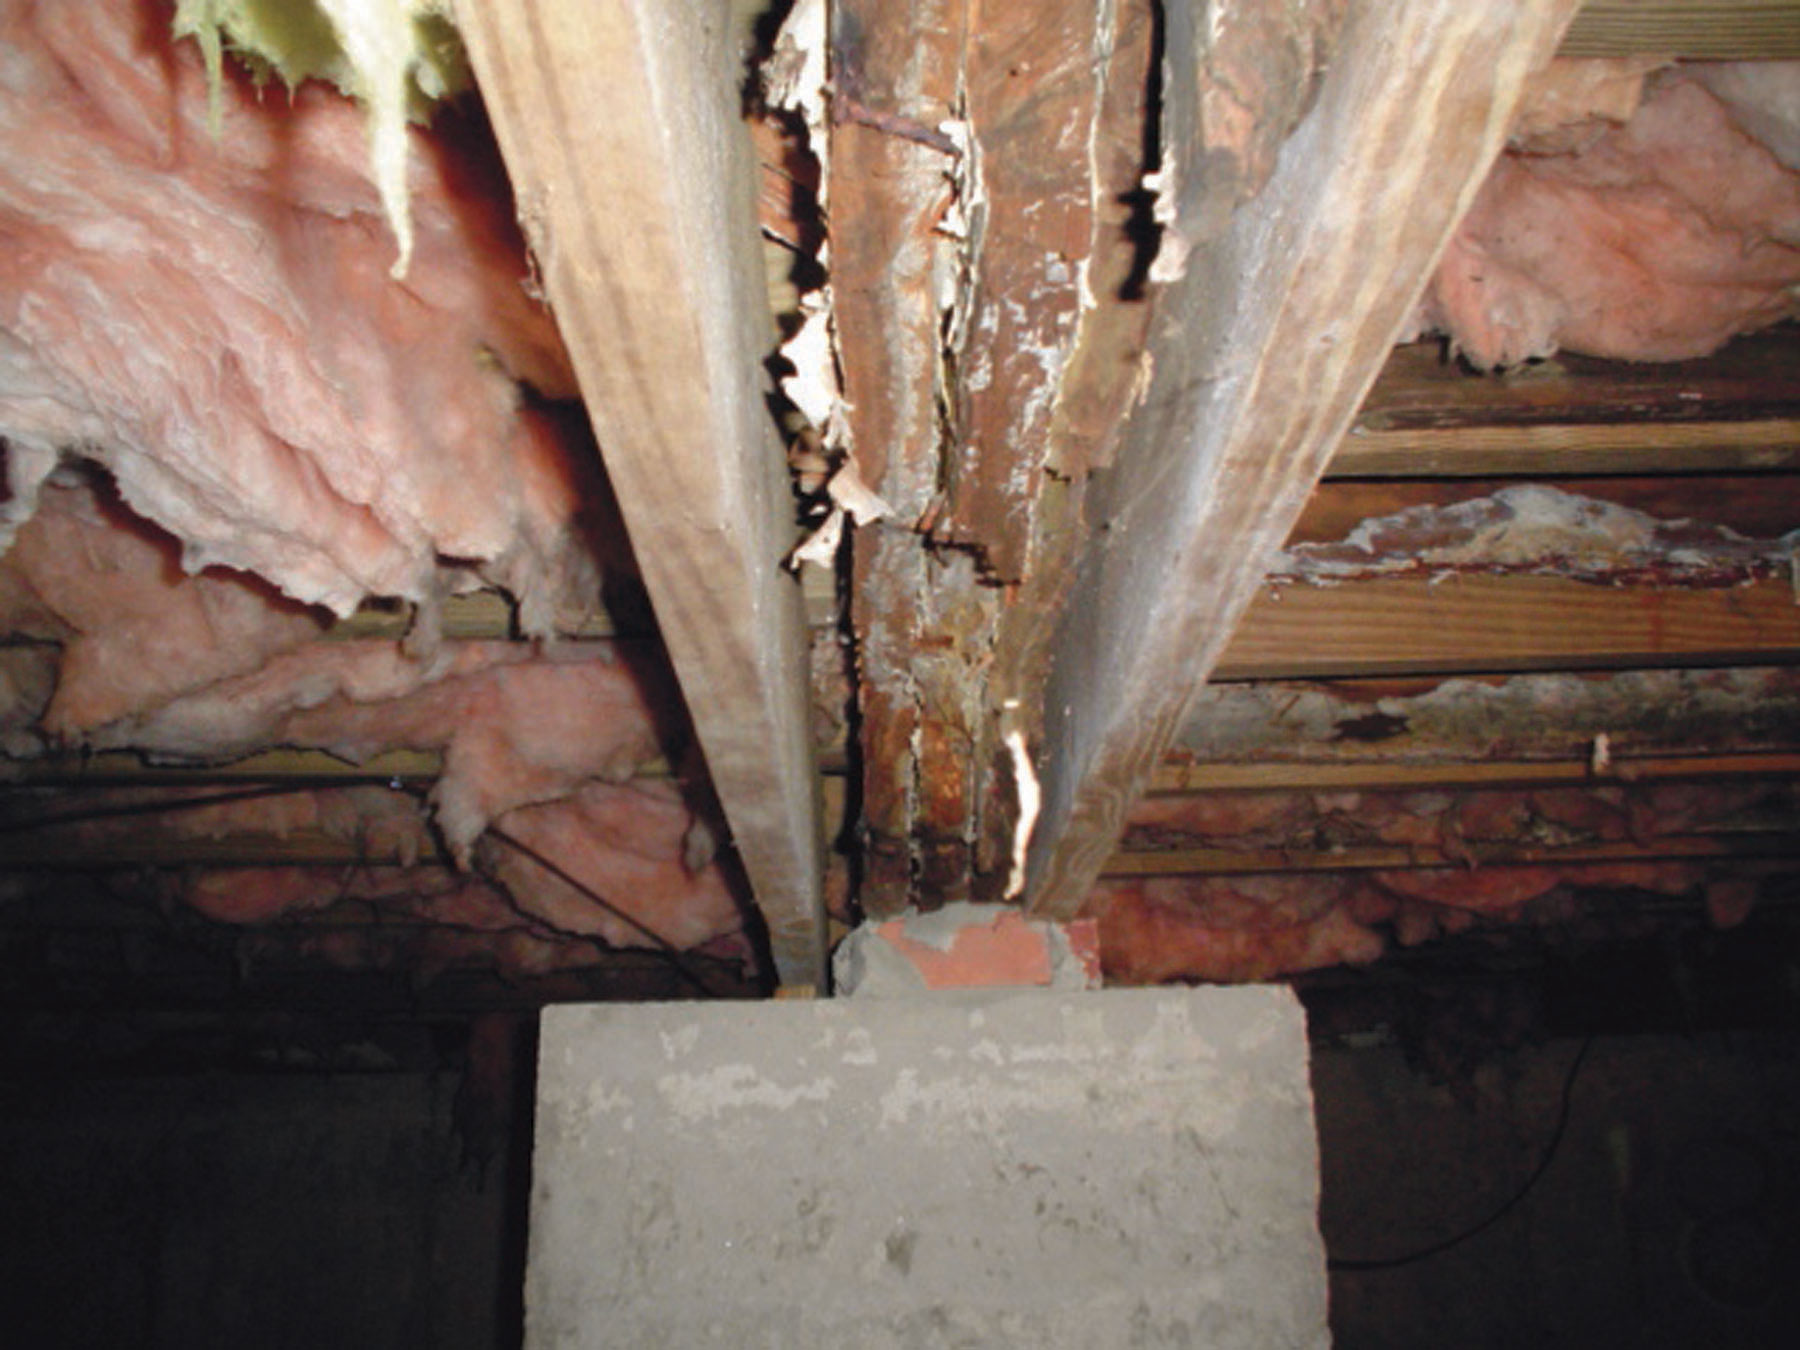 Rotting wood in crawl space